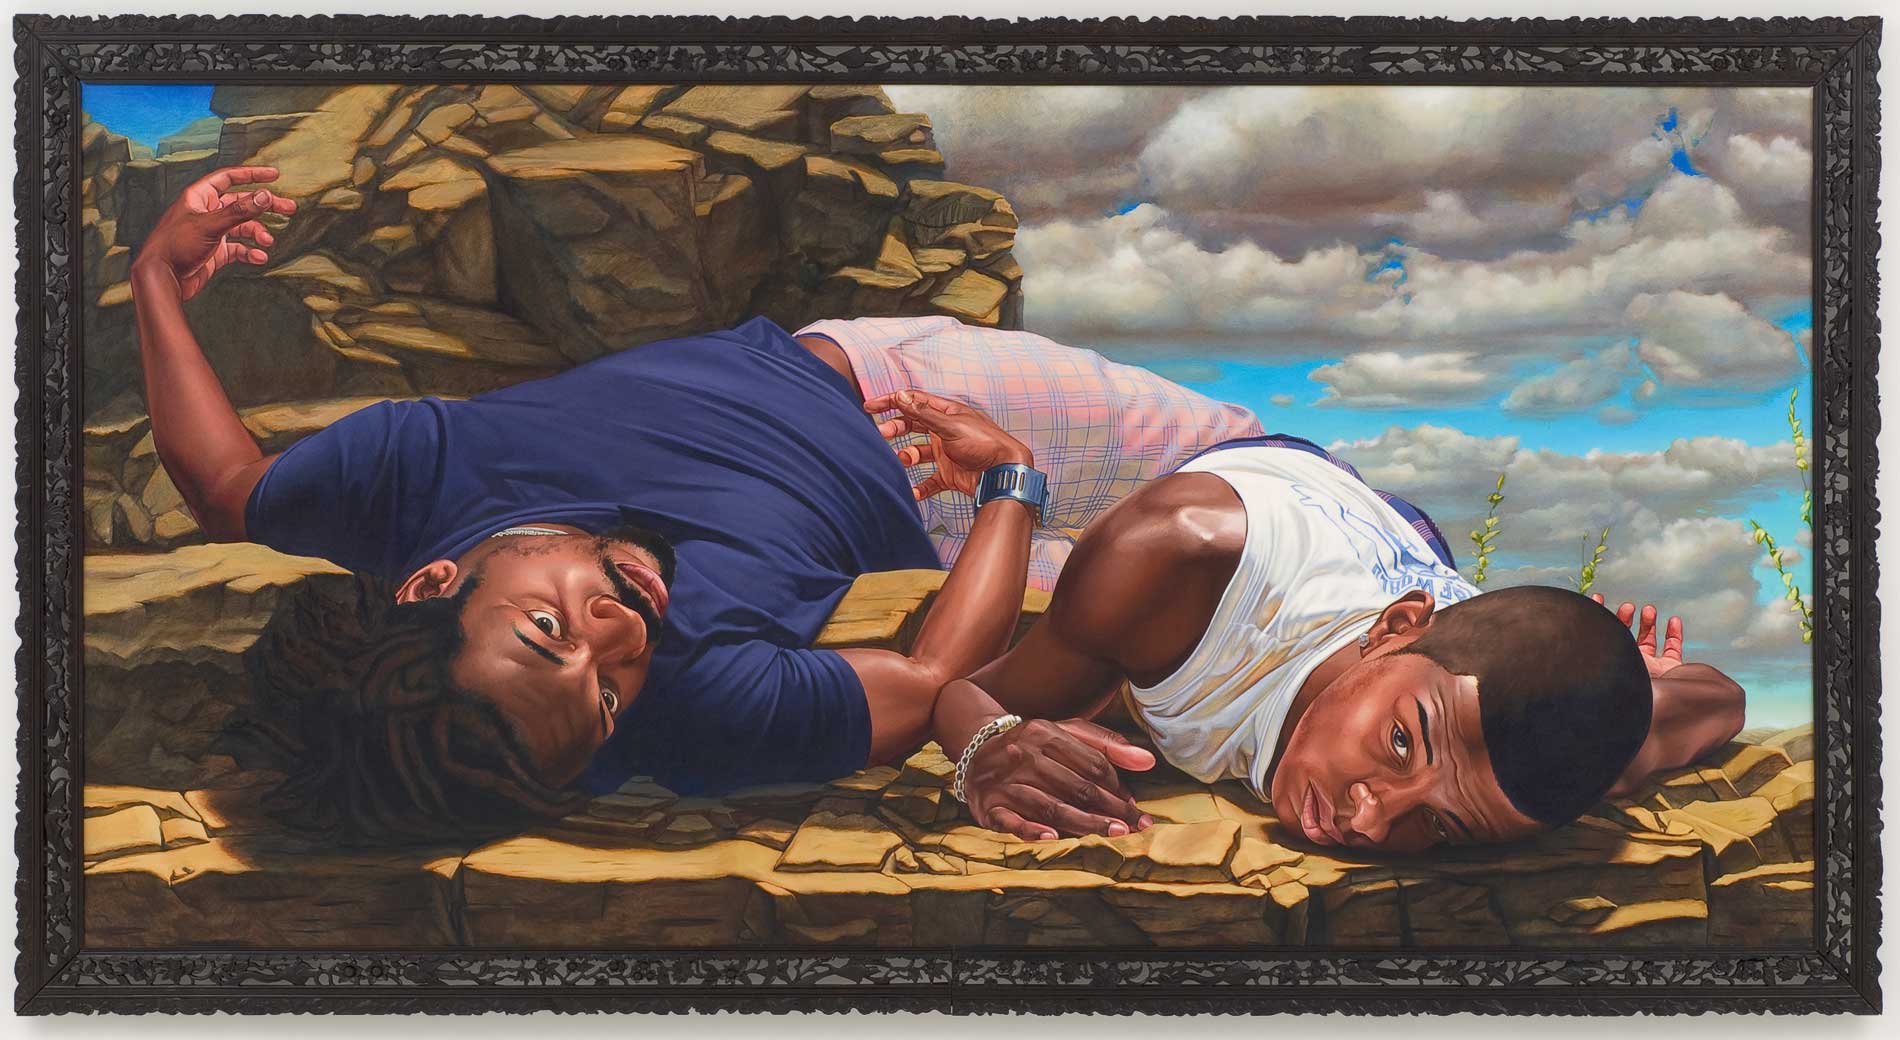 Kehinde Wiley | The World Stage: Brazil | Santos Dumont - The Father of Aviation II, 2009 Oil on Canvas. | 13